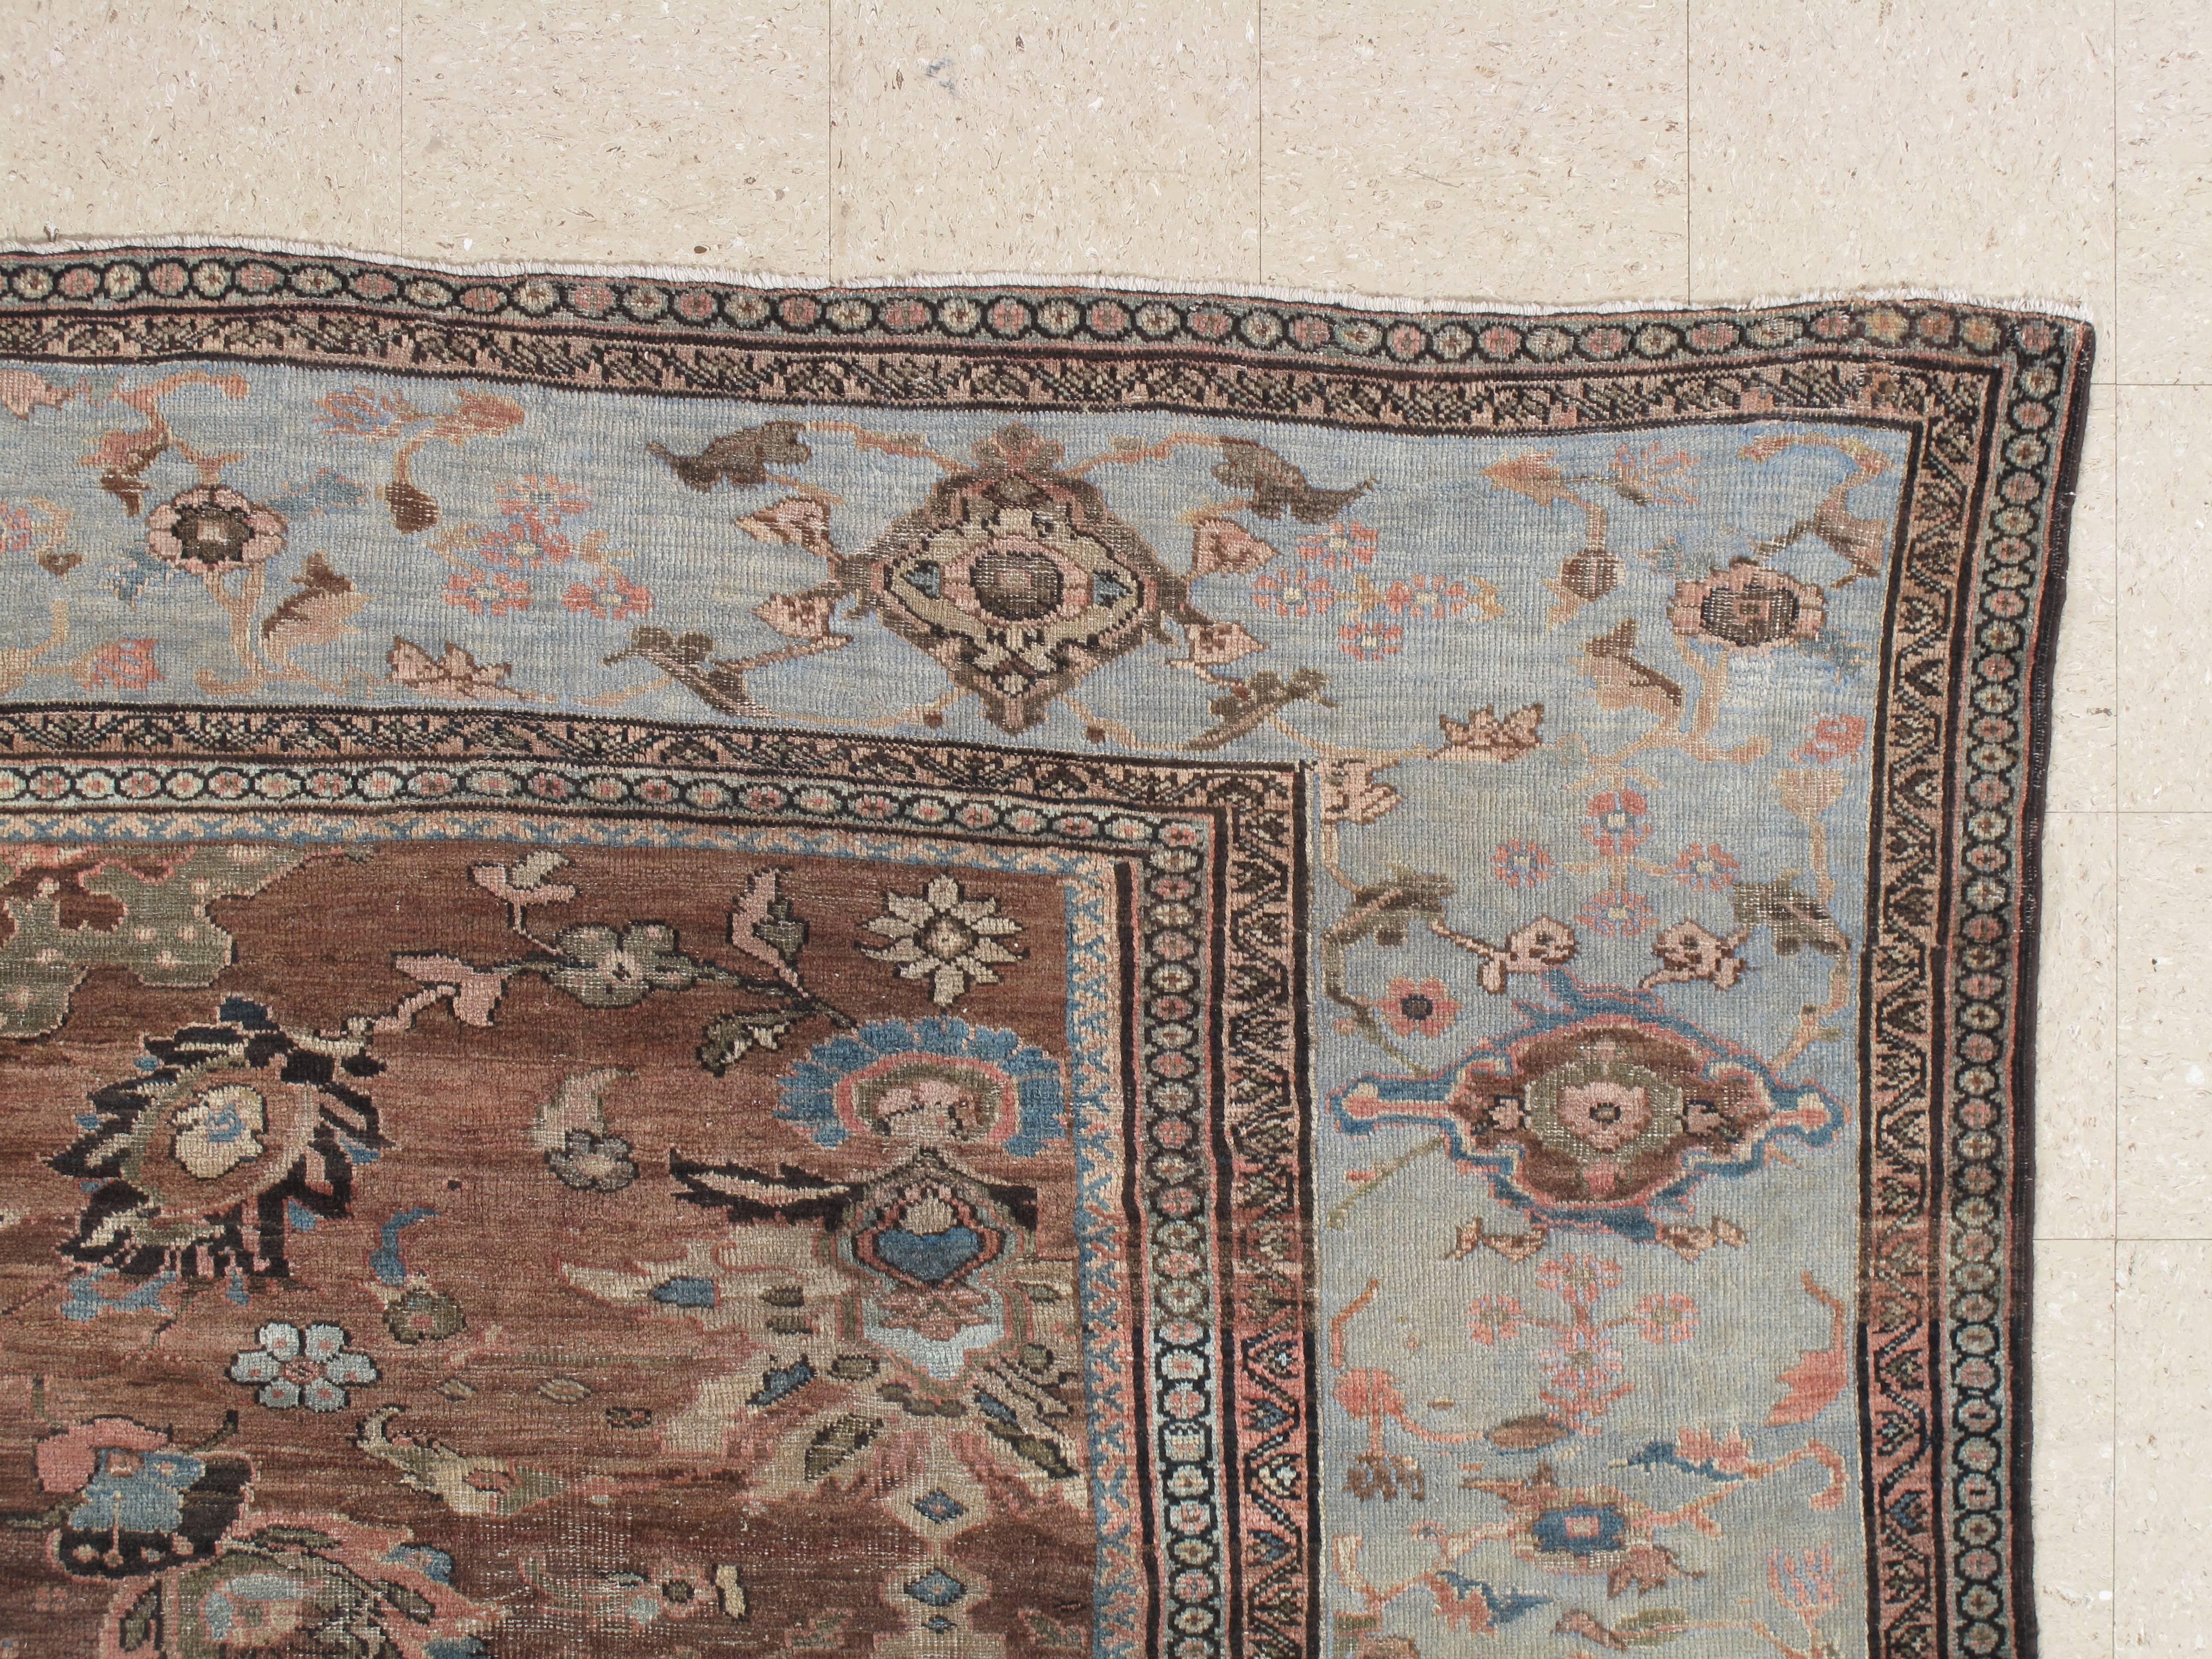 Hand-Knotted Antique Persian Sultanabad Carpet, Handmade Oriental Rug, Light Blue, Terracotta